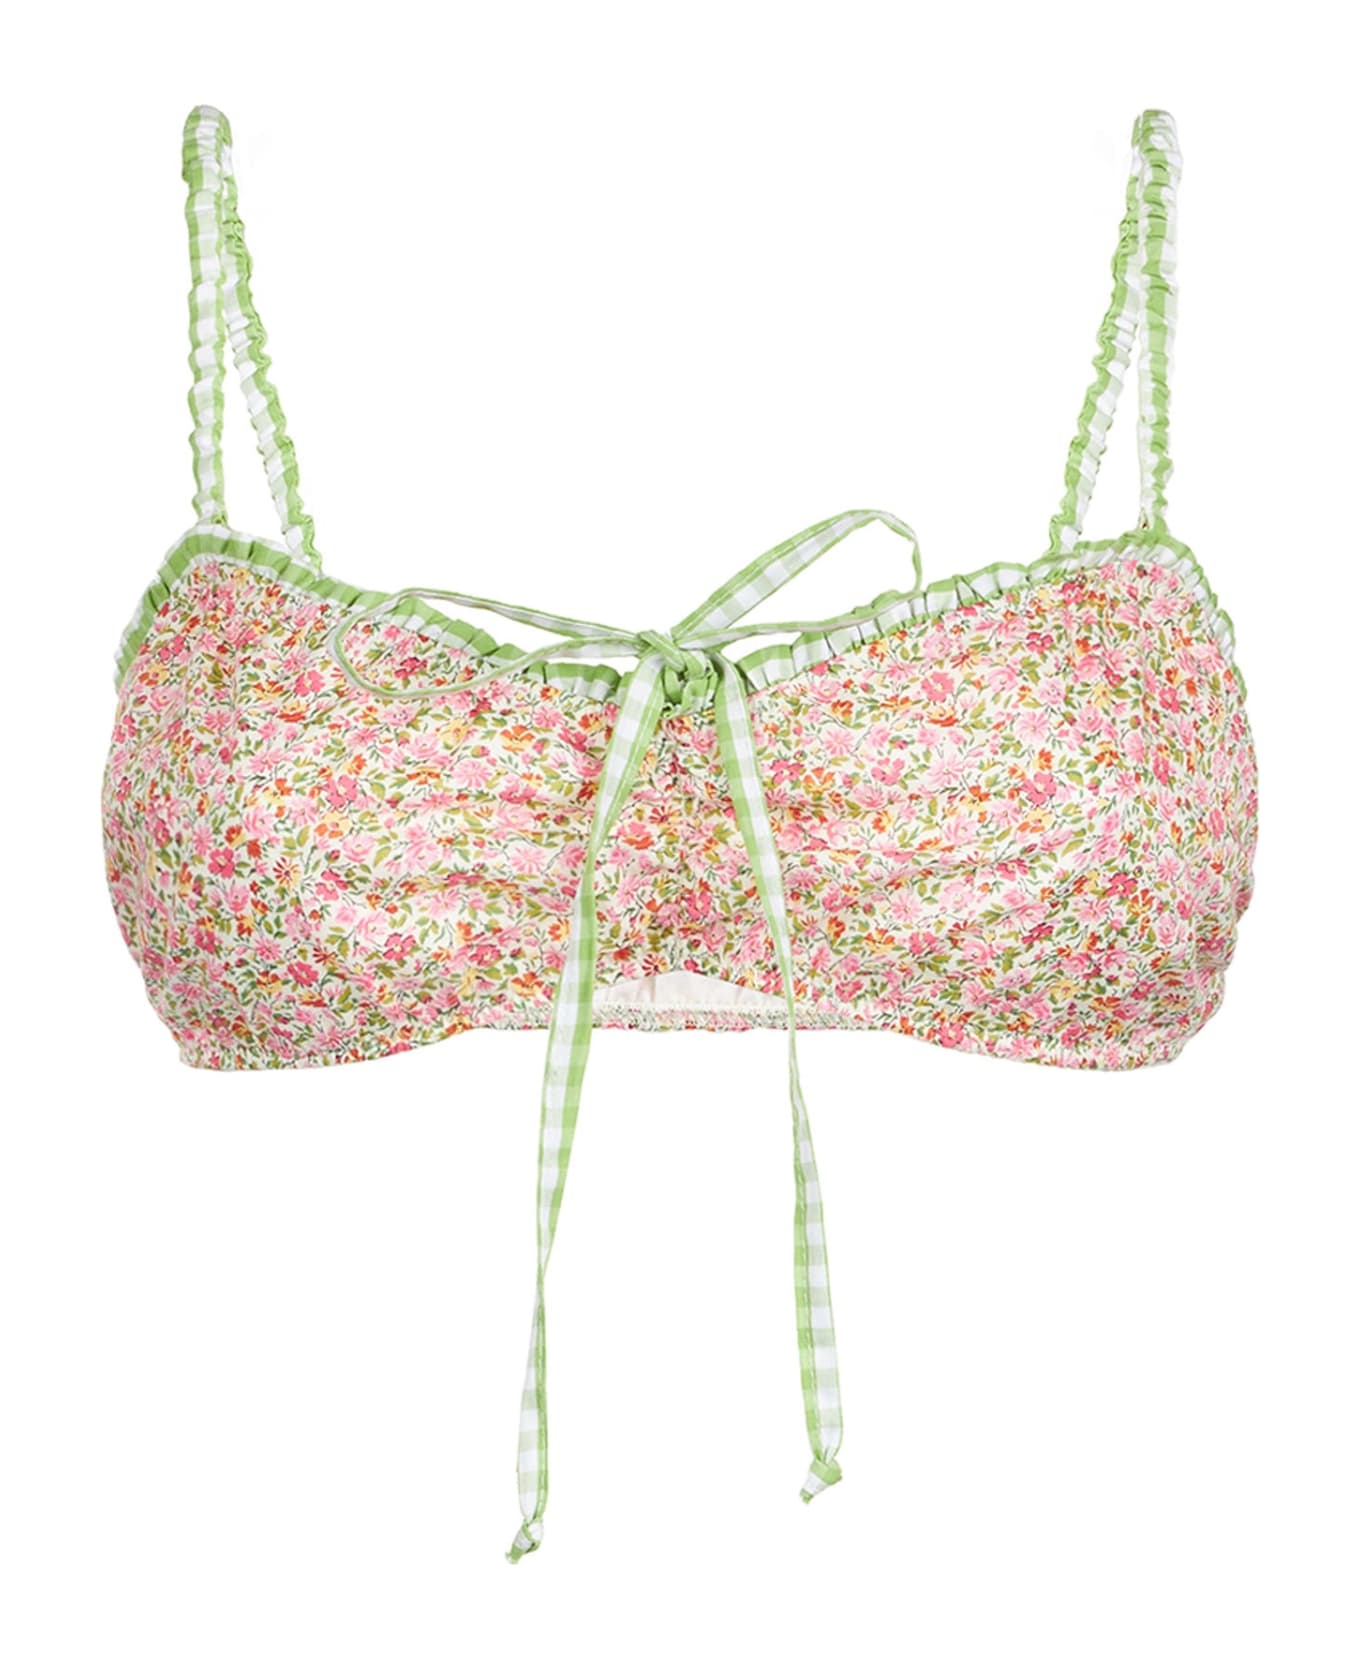 MC2 Saint Barth Top Bralette Swimsuit With Liberty Print | Made With Liberty Fabric - GREEN